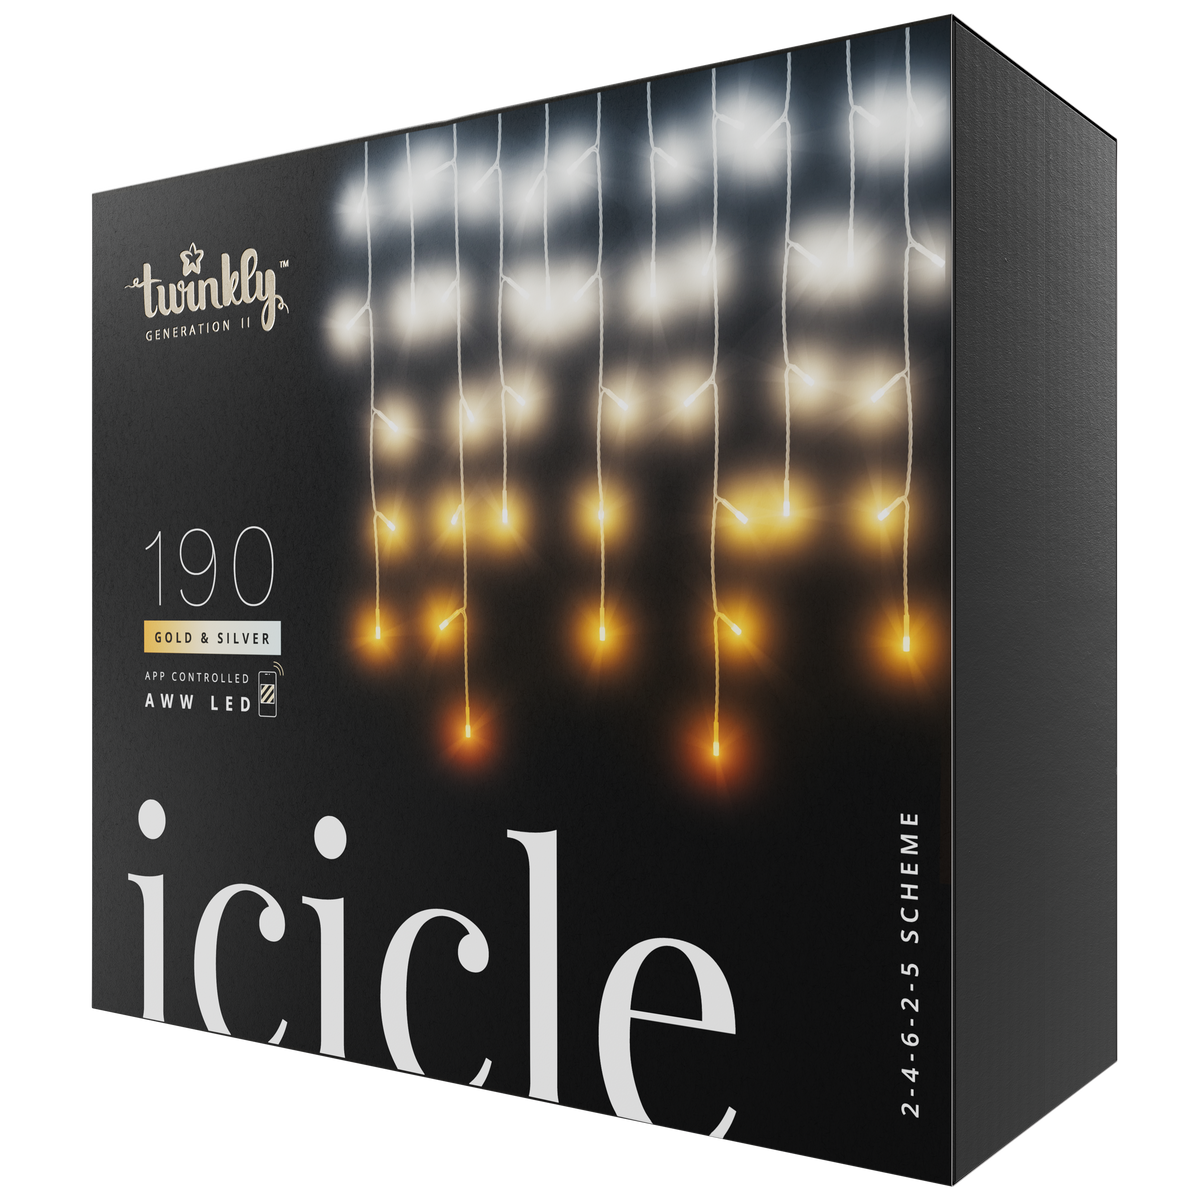 Icicle (Gold & Silber Edition)